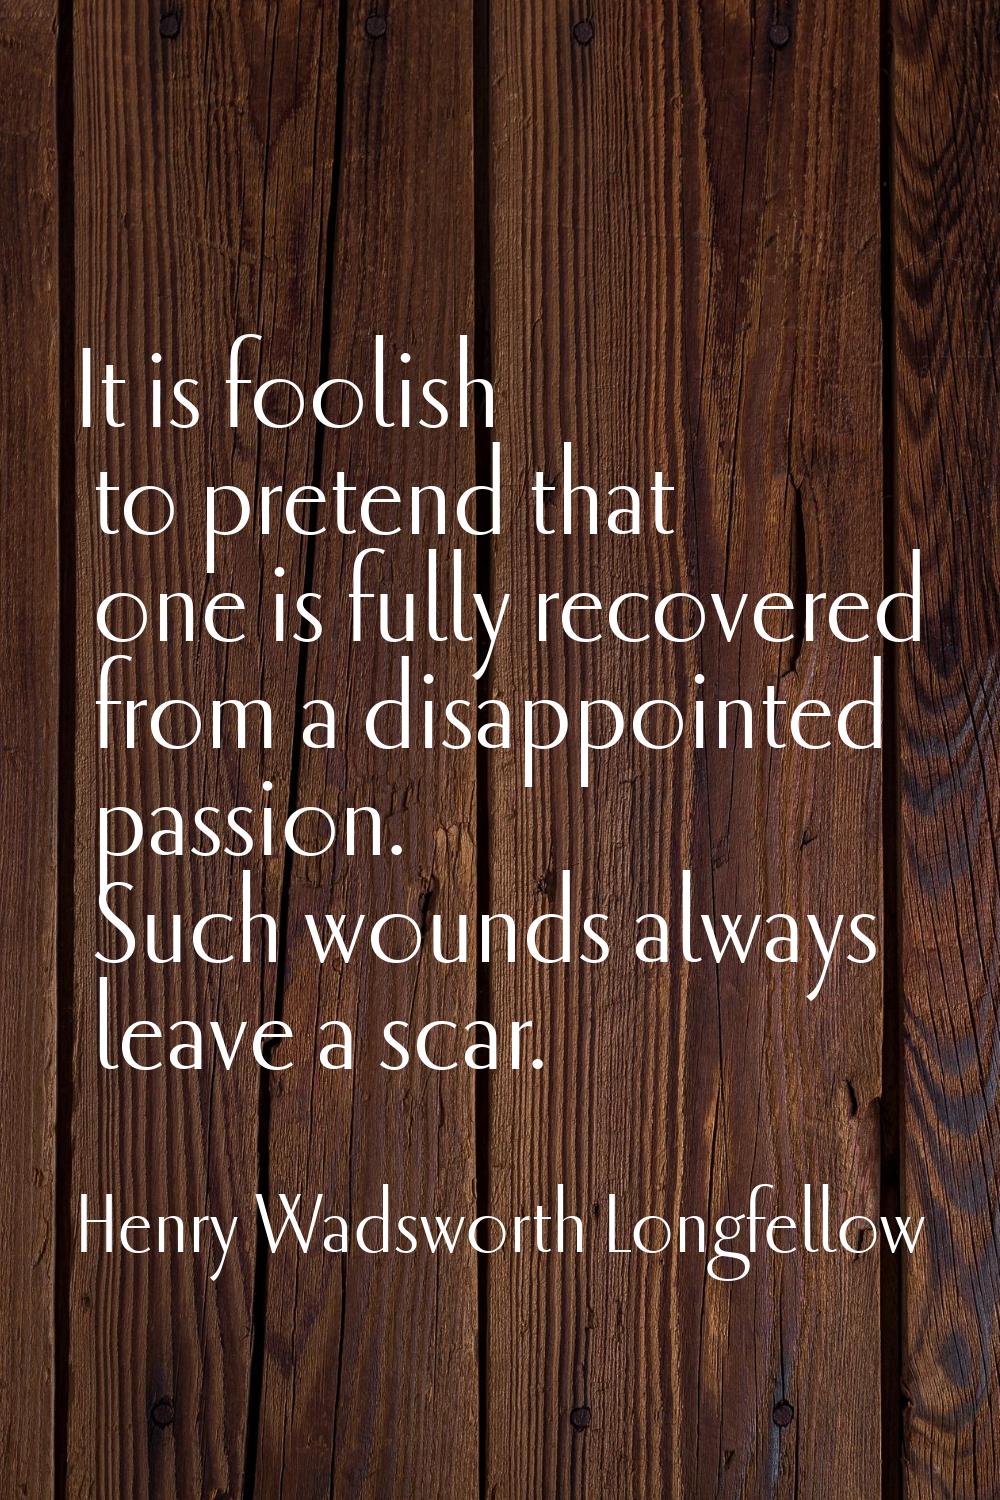 It is foolish to pretend that one is fully recovered from a disappointed passion. Such wounds alway